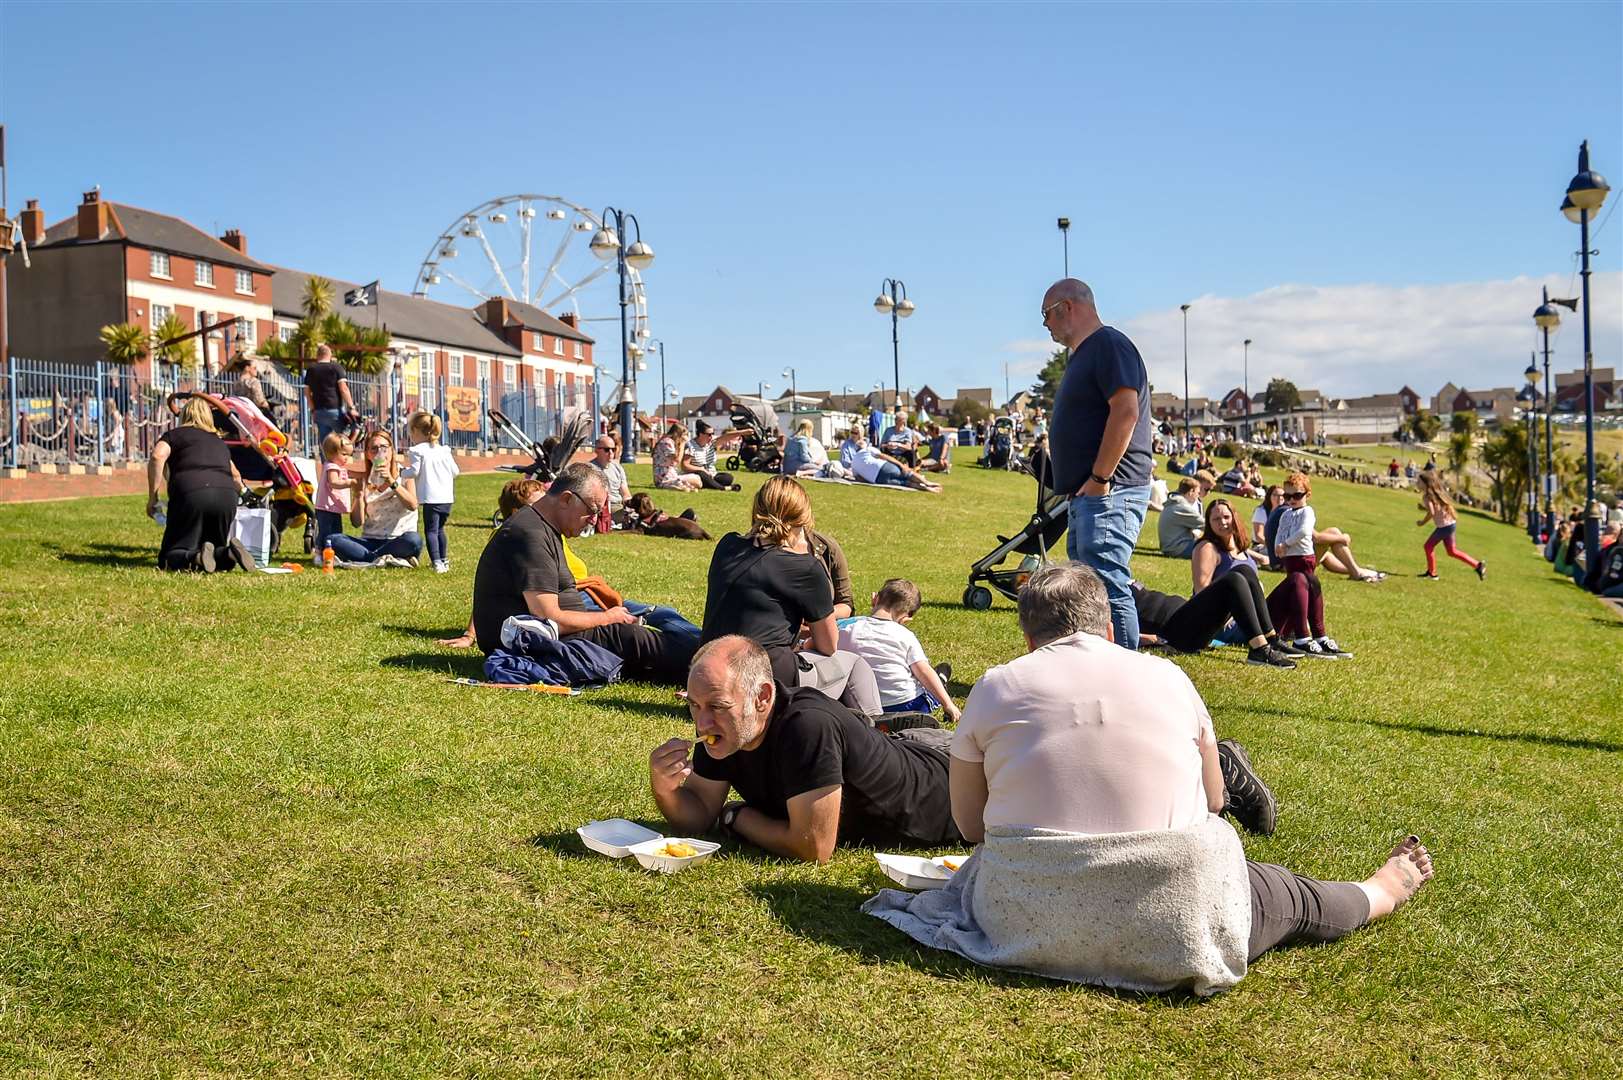 Lunch in the sun at Barry Island, Wales (Ben Birchall/PA)